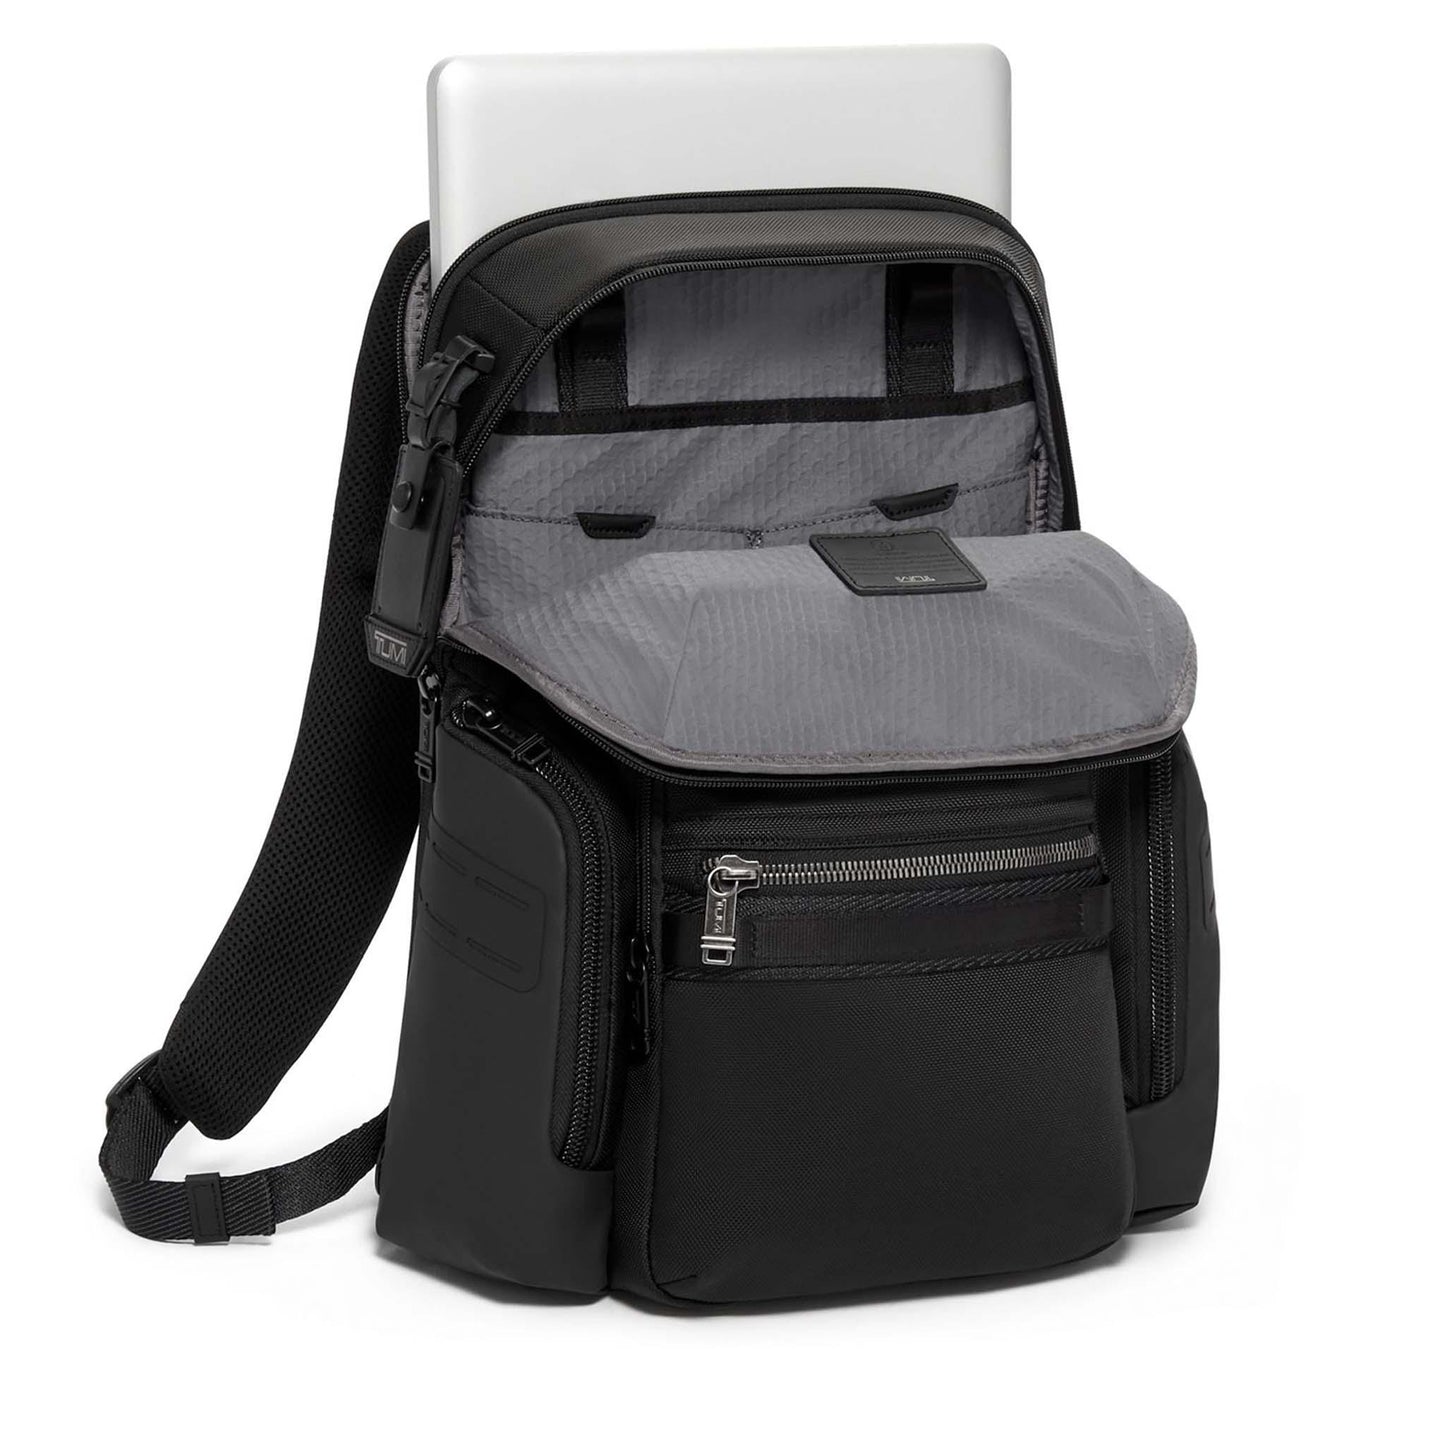 Navigation Backpack - Cosmos Boutique New Jersey